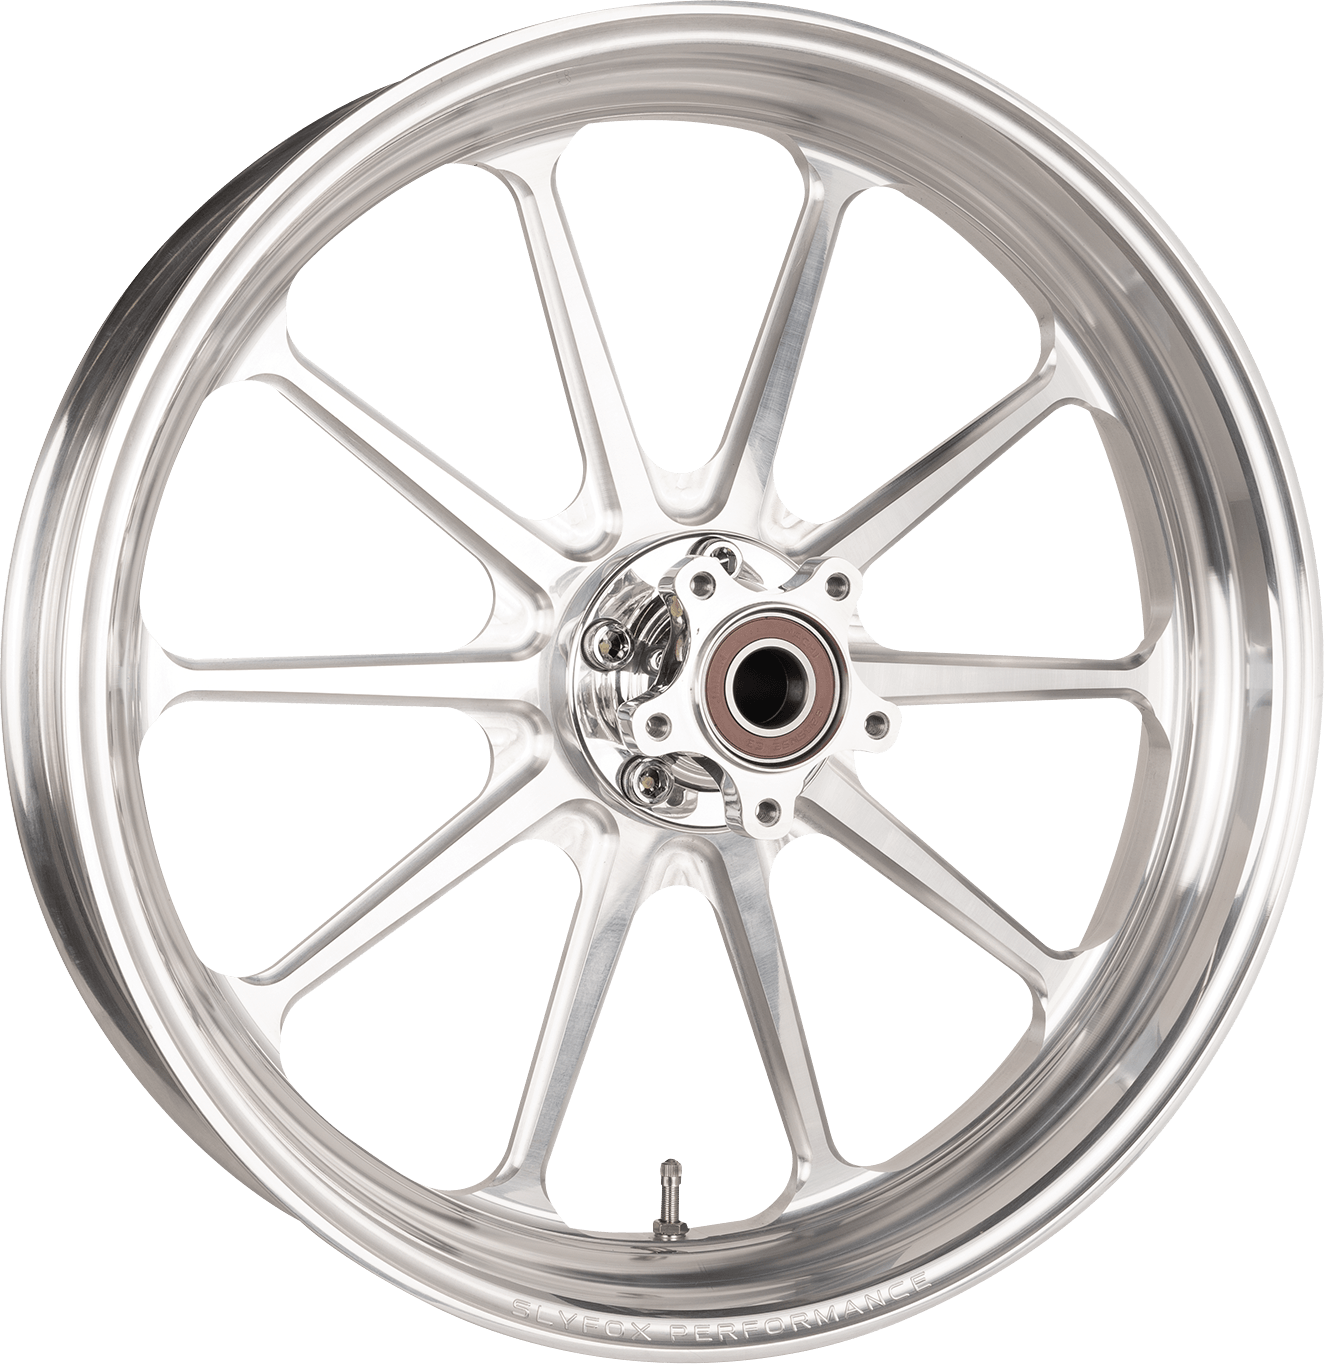 SLYFOX-19"x 3" Front Track Pro Wheels / '08-Up Bagger-Wheels-MetalCore Harley Supply